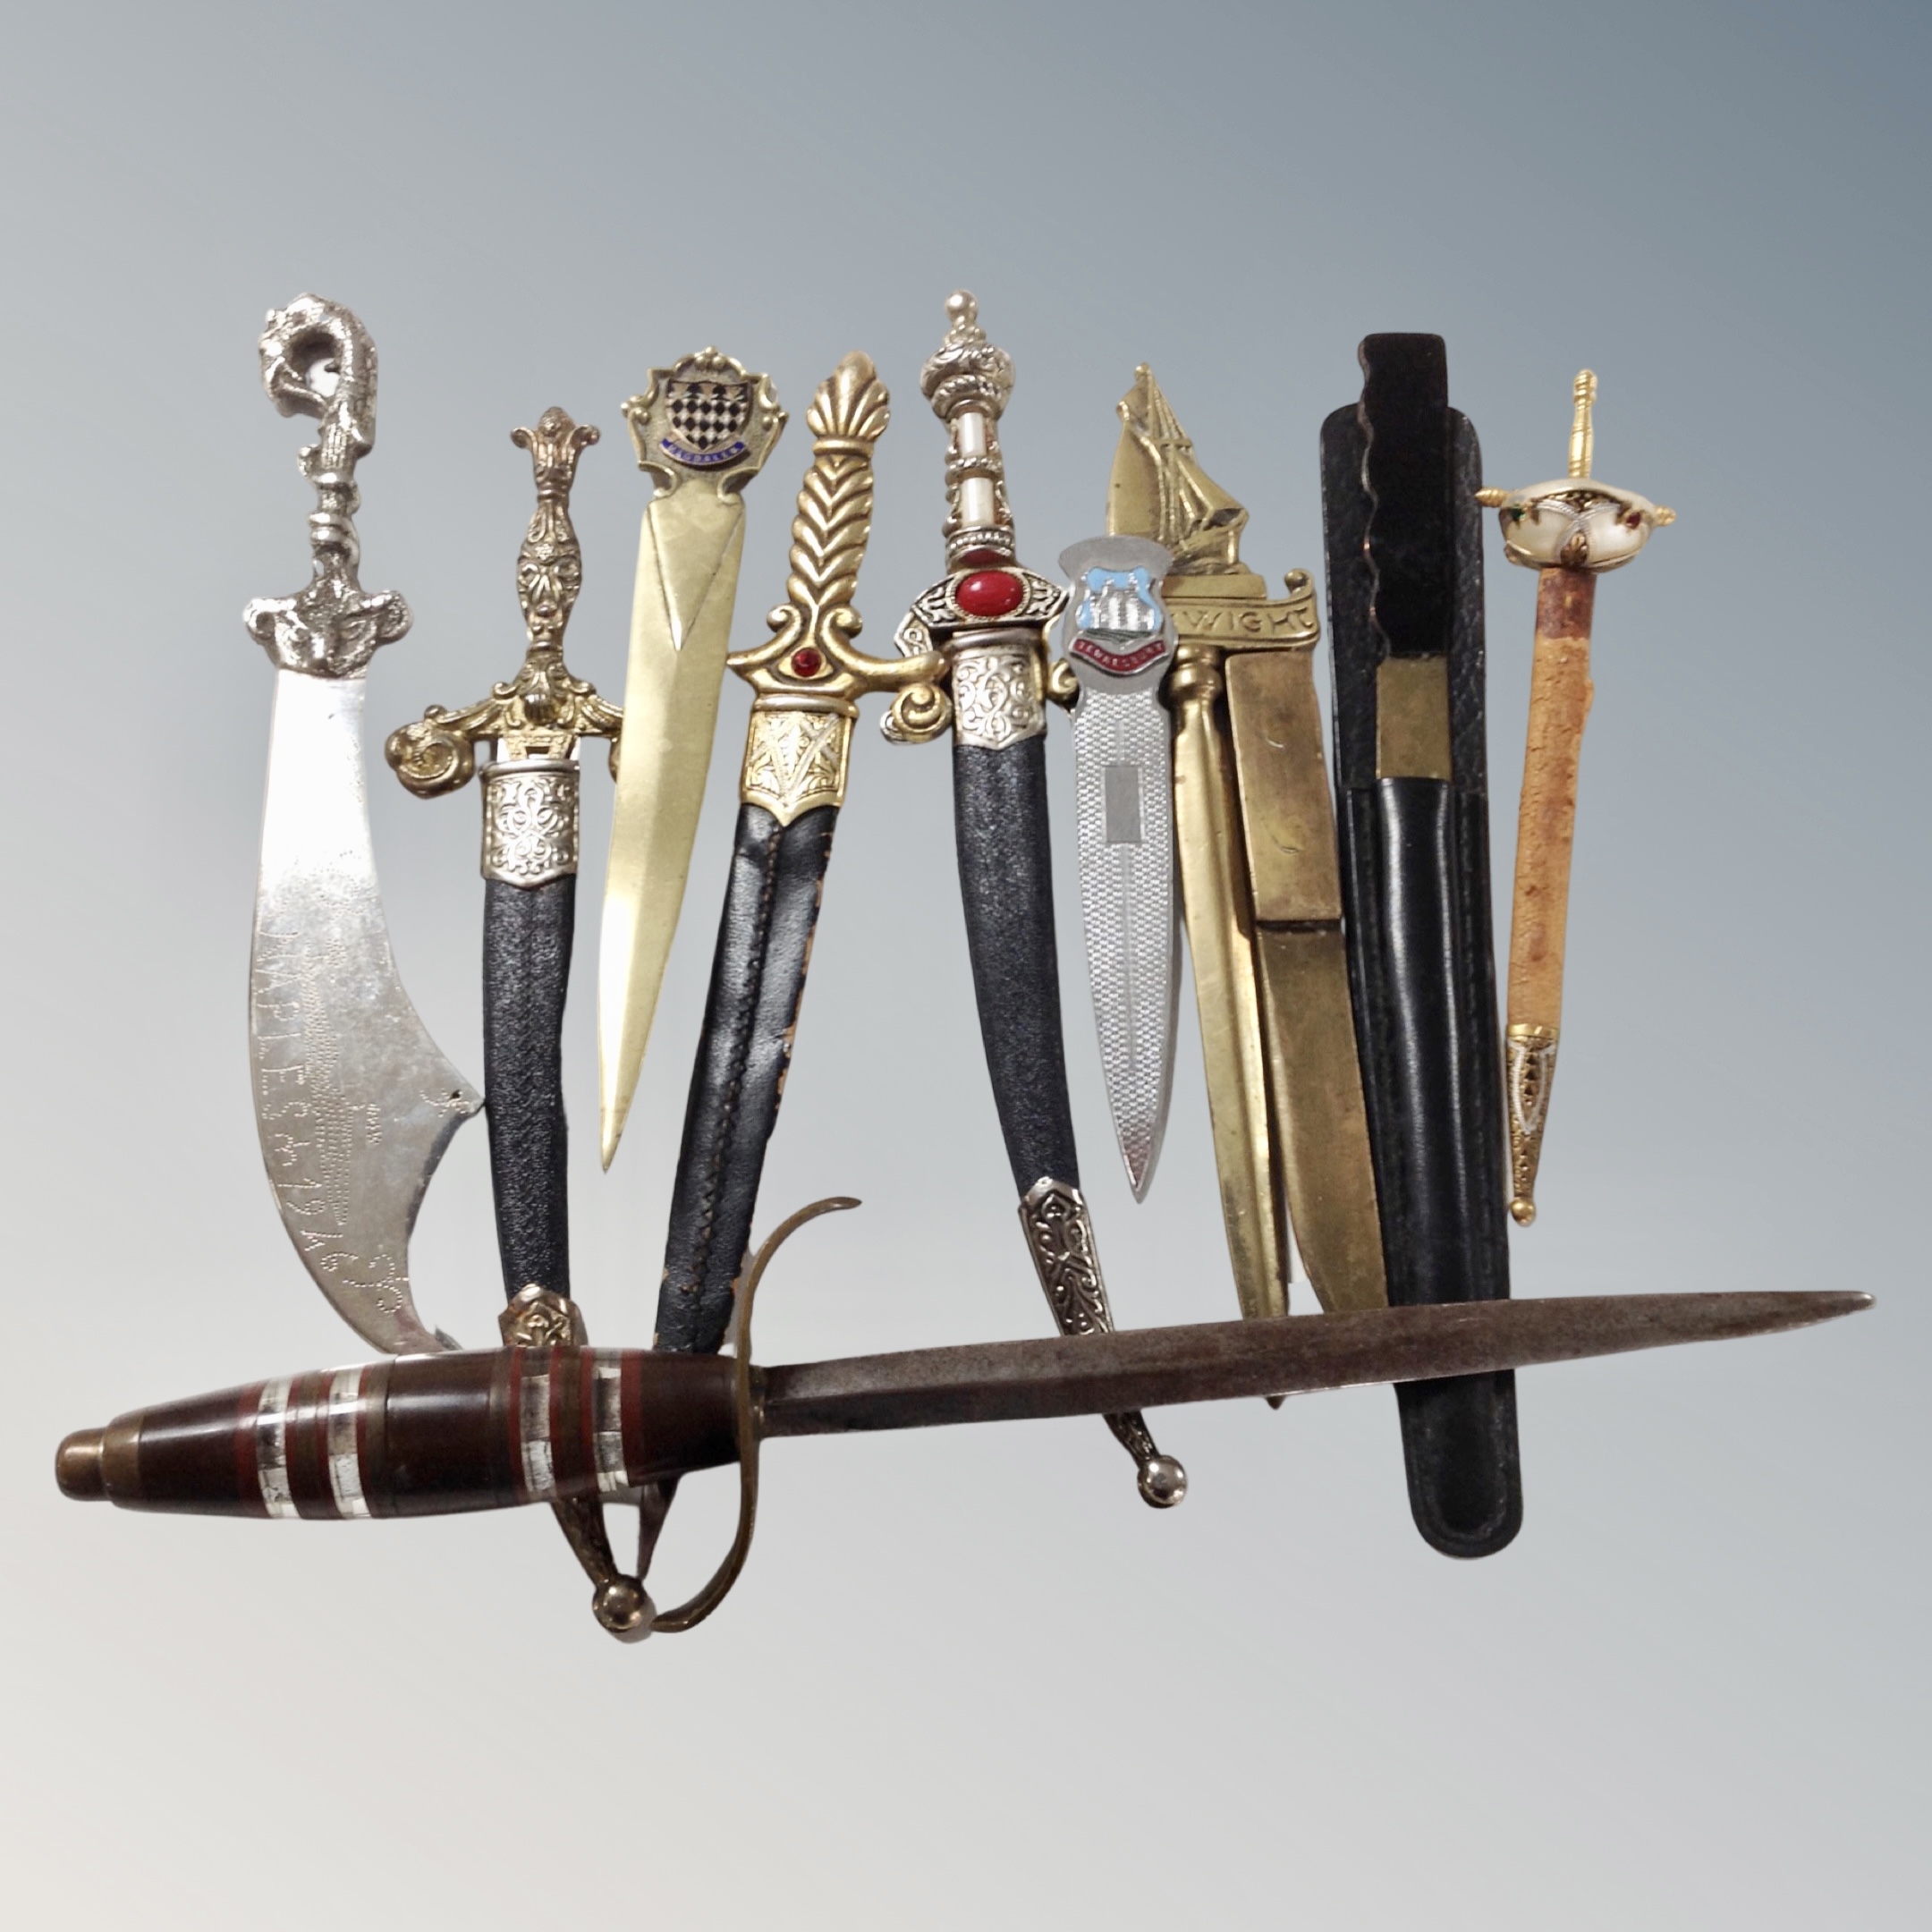 Assorted paper knives and letter openers, most in the form of Eastern swords and knives.